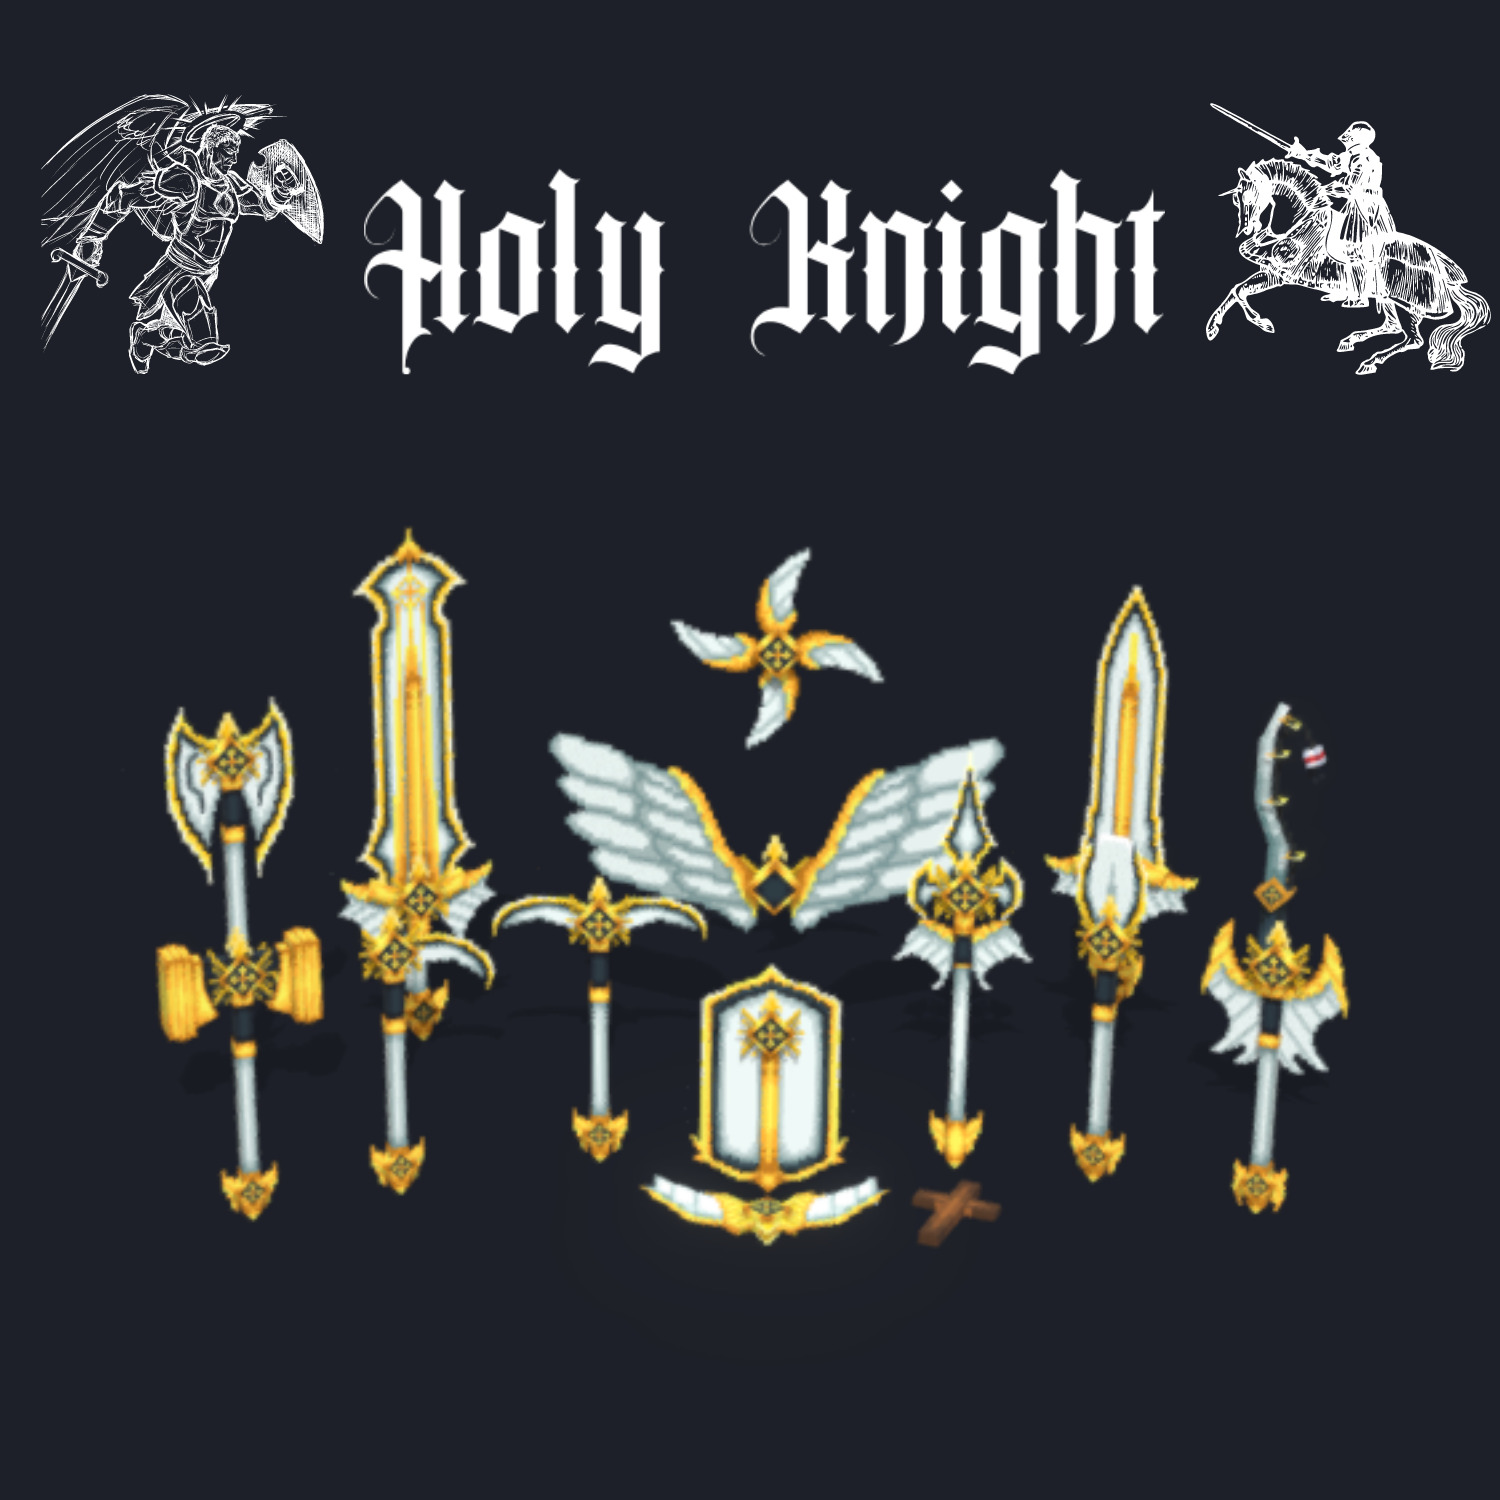 Holy-Animated-Knight-Weapon-Volume-2-cover-new.jpg